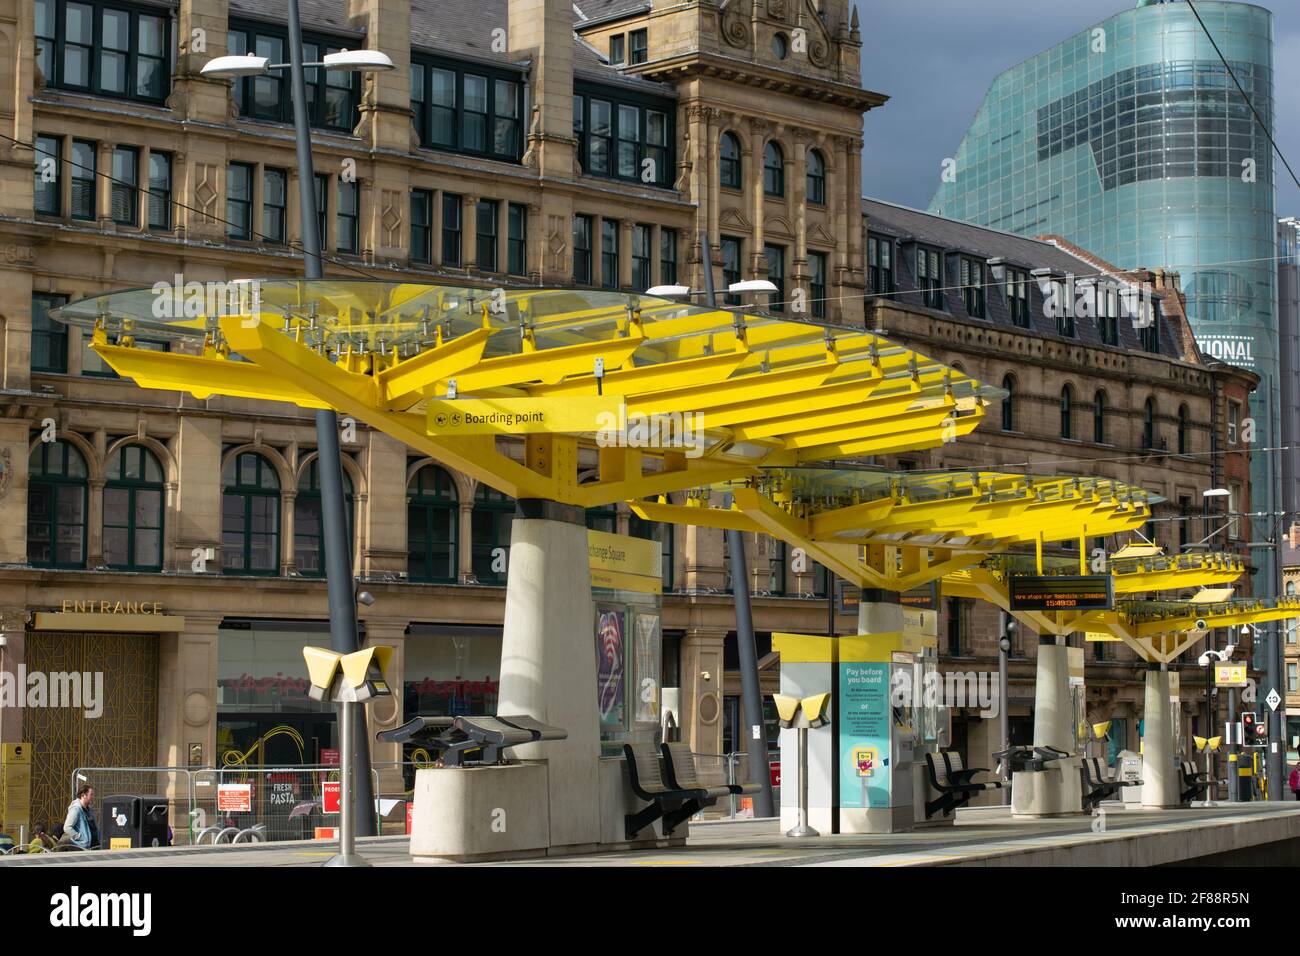 Exchange Square Metrolink tram stop with no people during national lockdown in England. National Museum of Football in background. Stock Photo